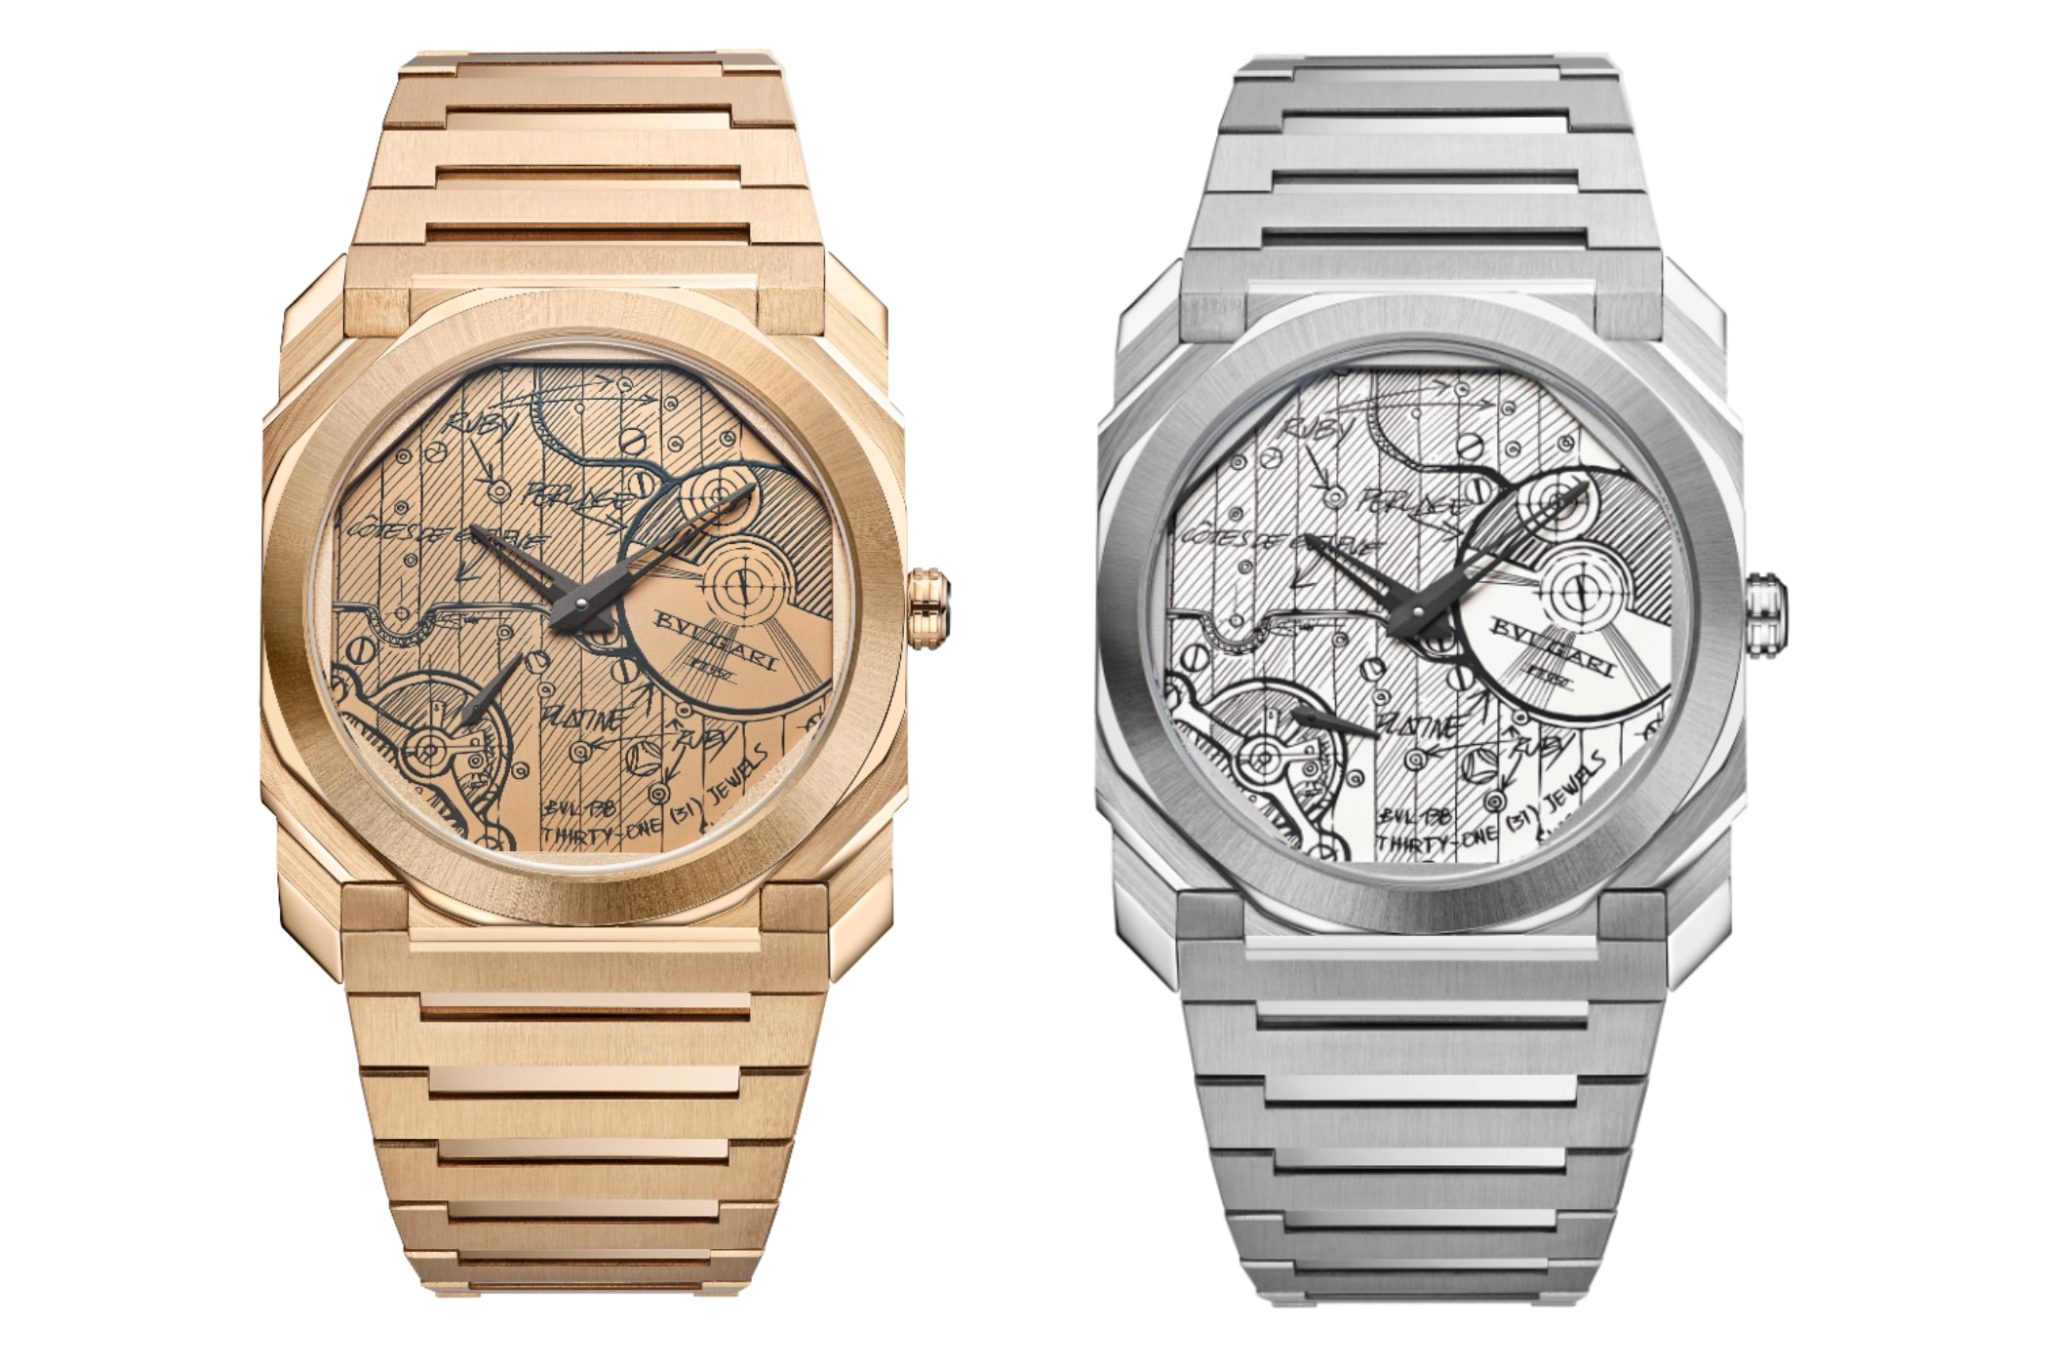 bulgari-octo-finissimo-automatic-sketch-stahl-rosegold-side-by-side